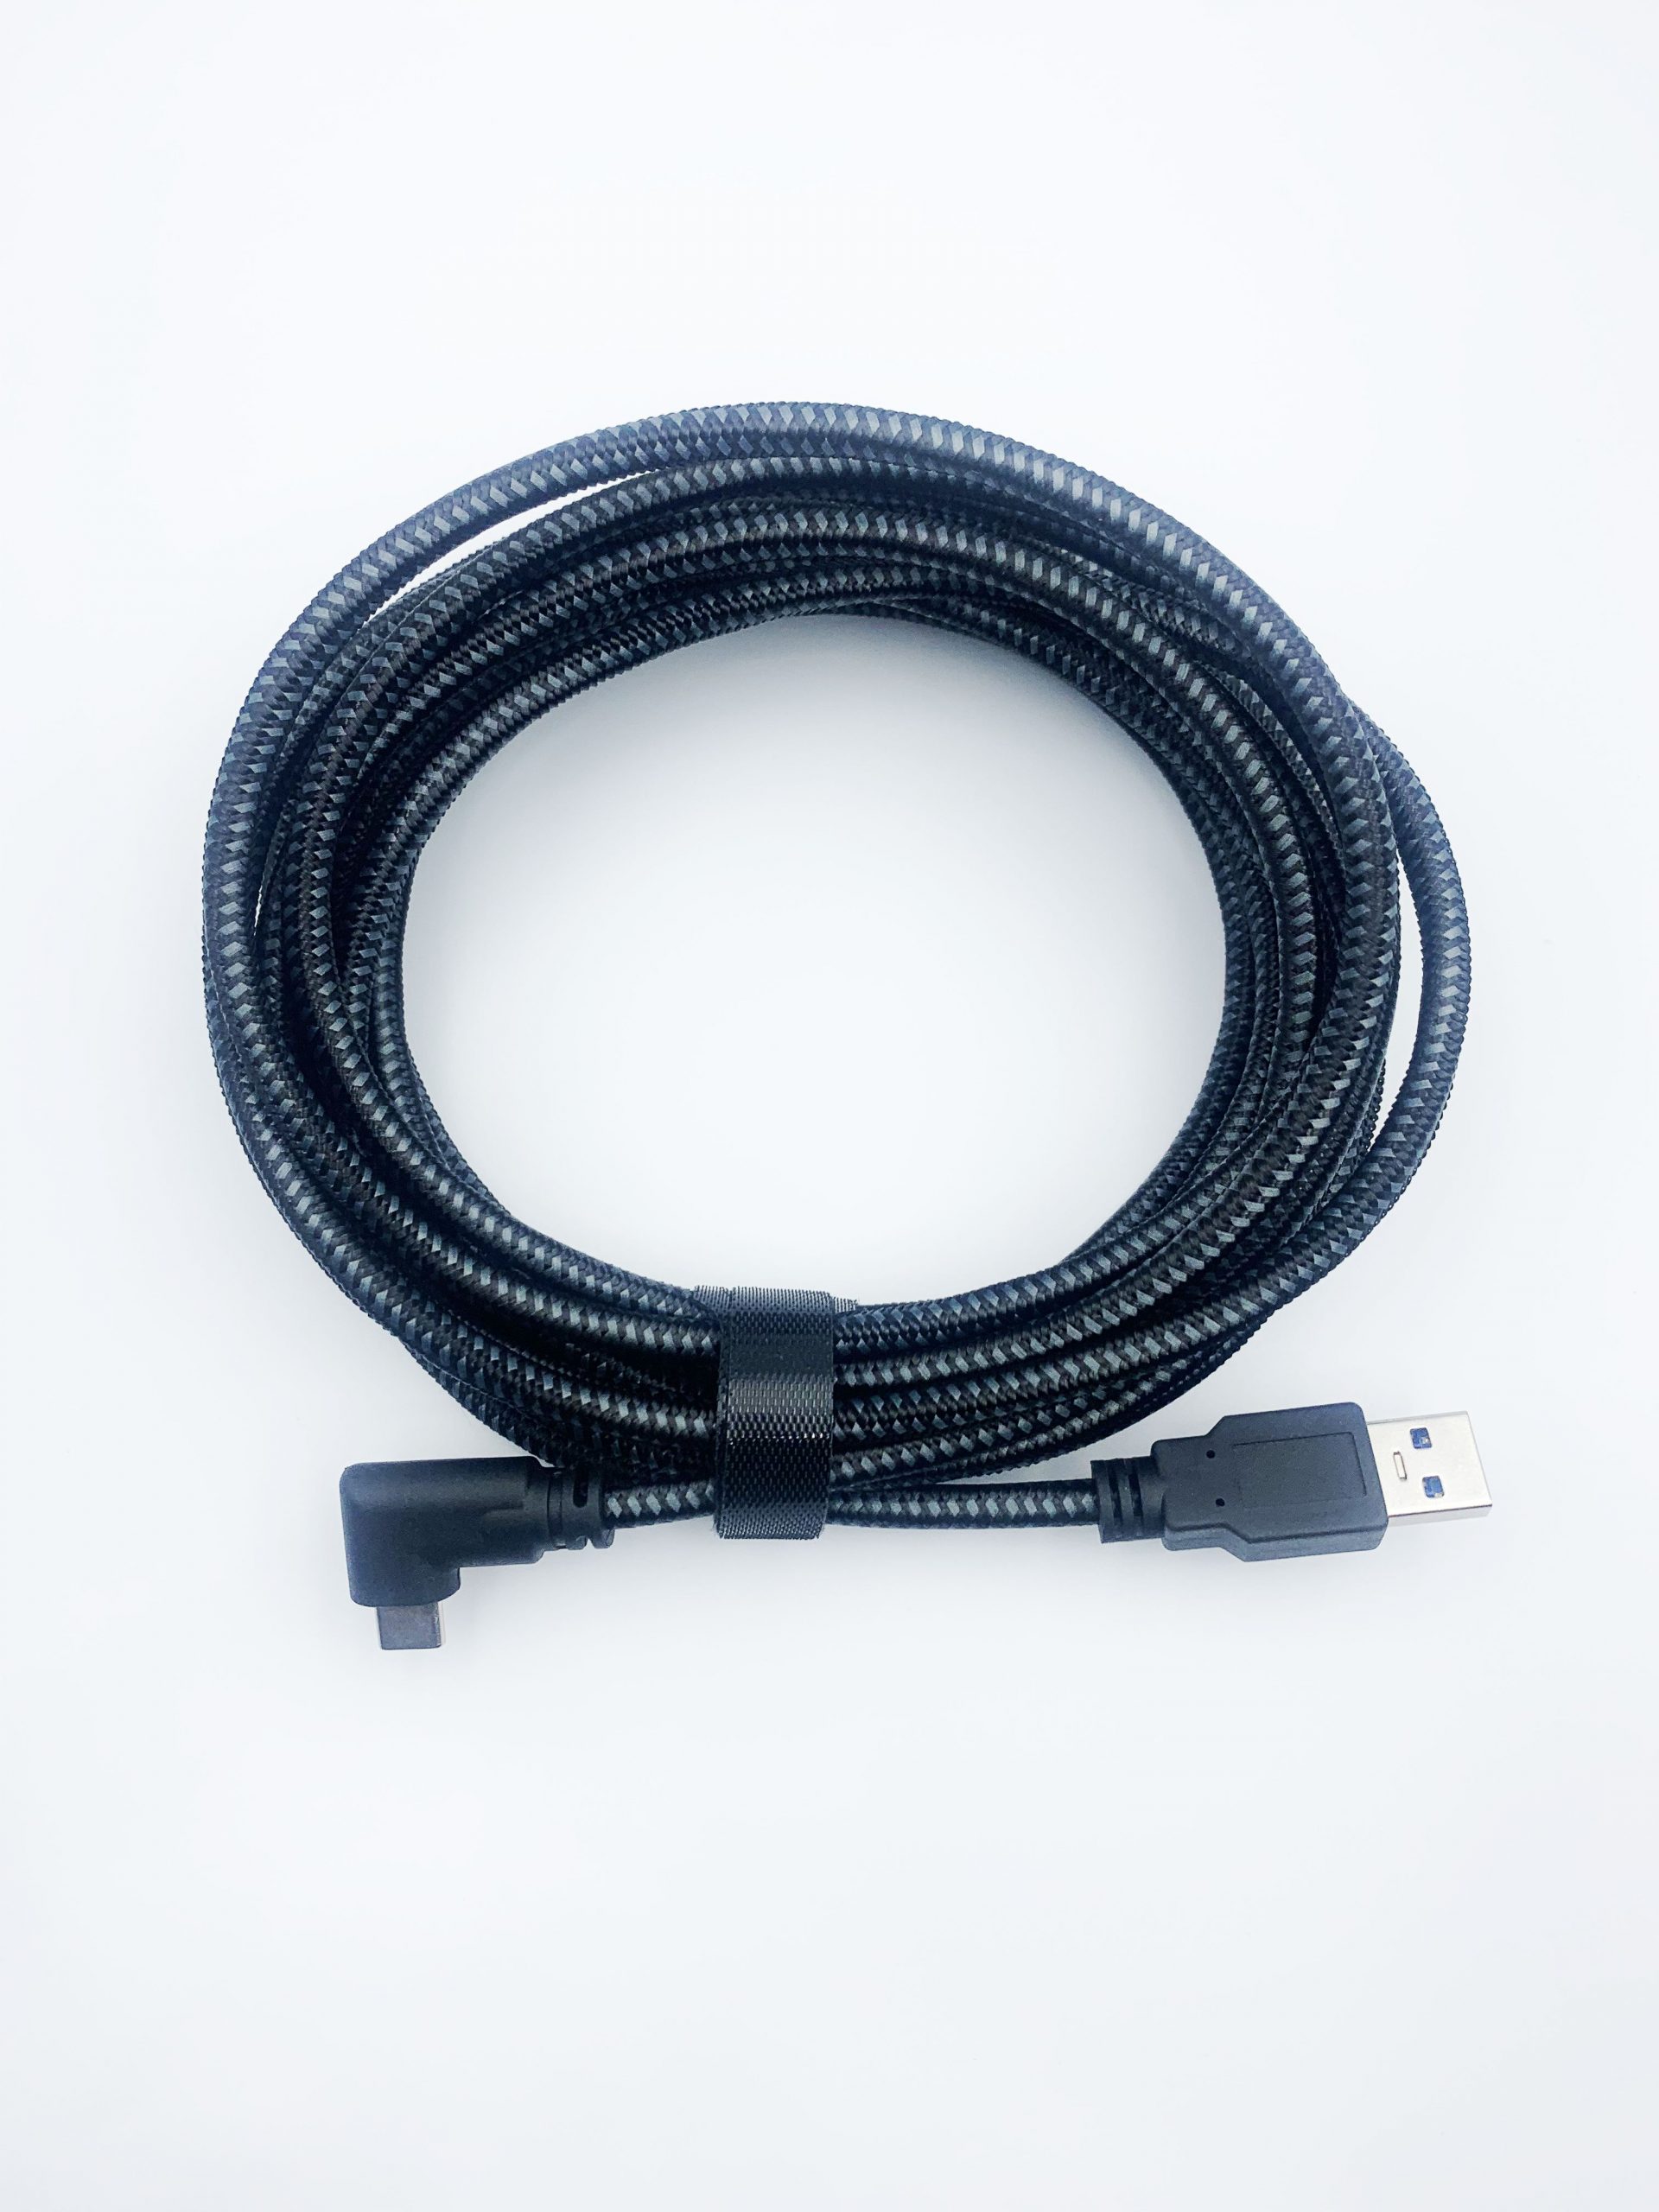 16ft USB Cable